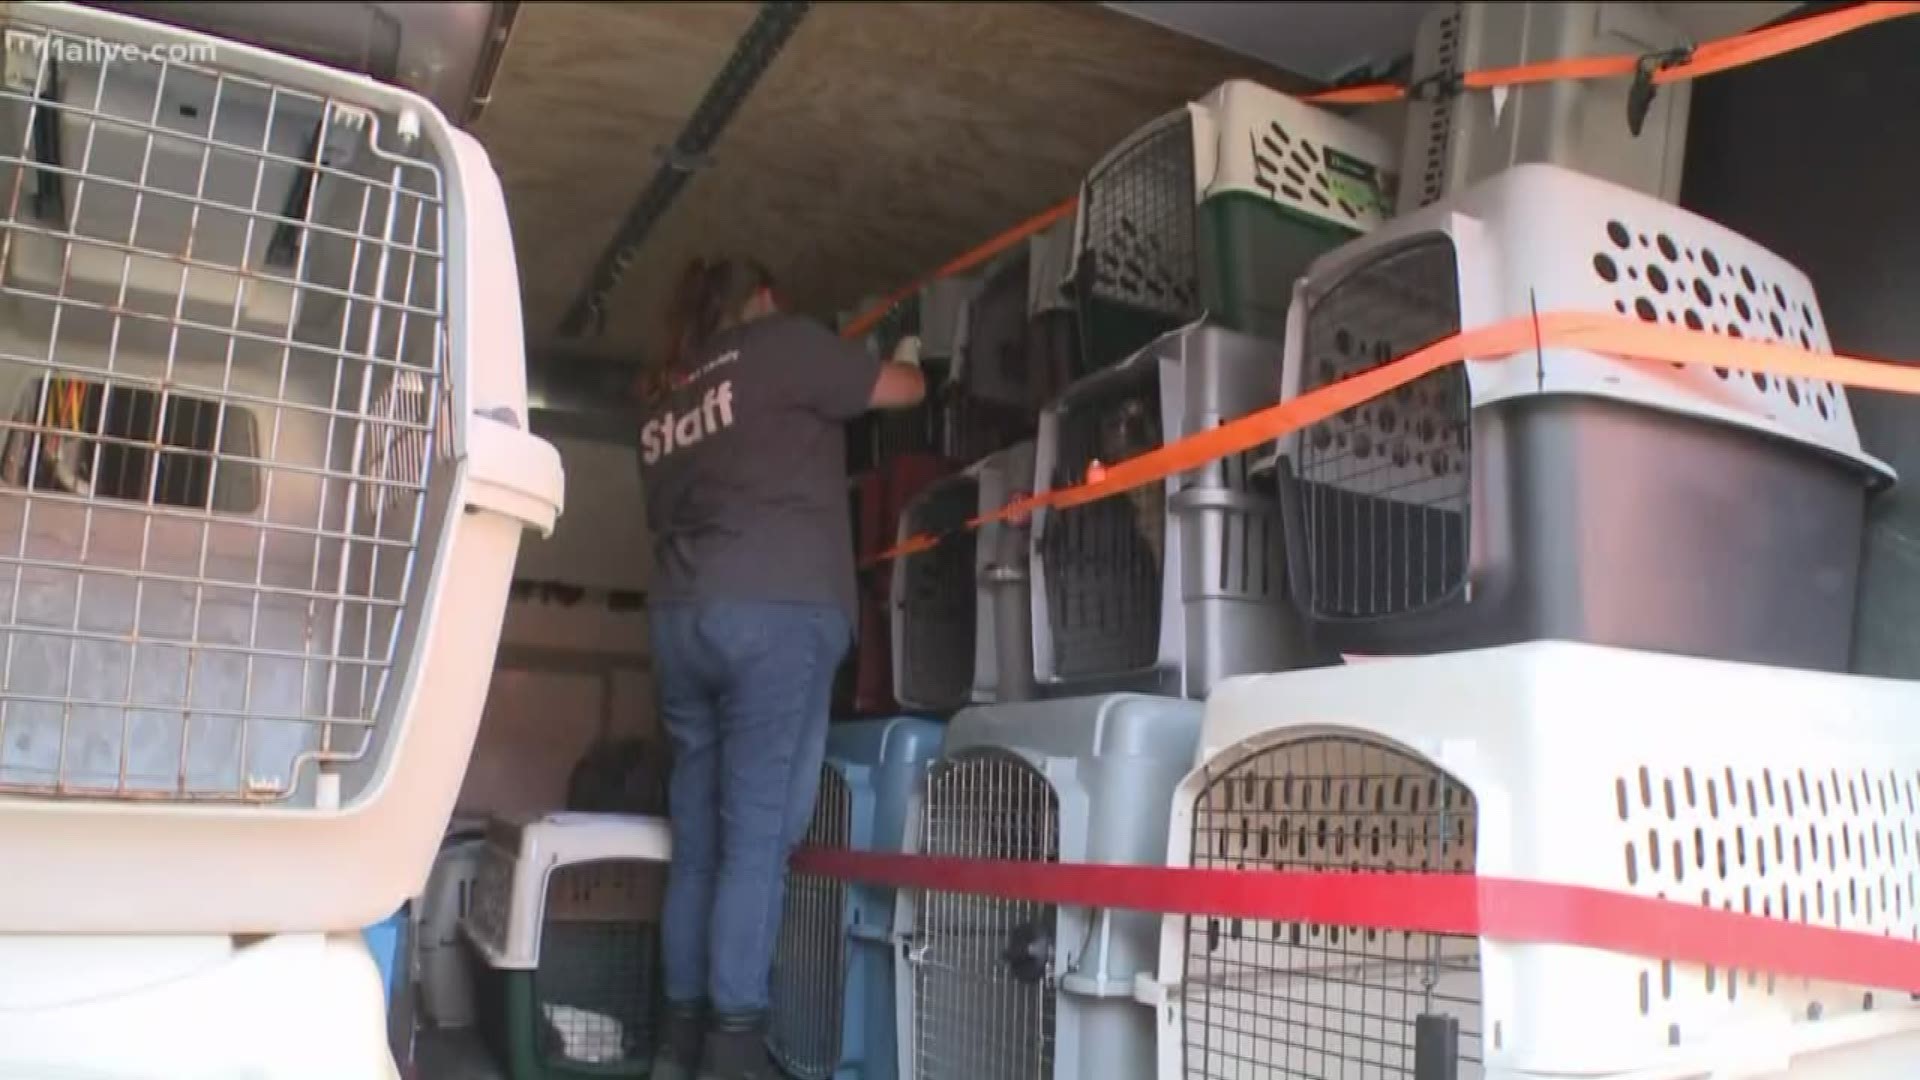 The Atlanta Humane Society is working to help out in this large-scale case of animal cruelty